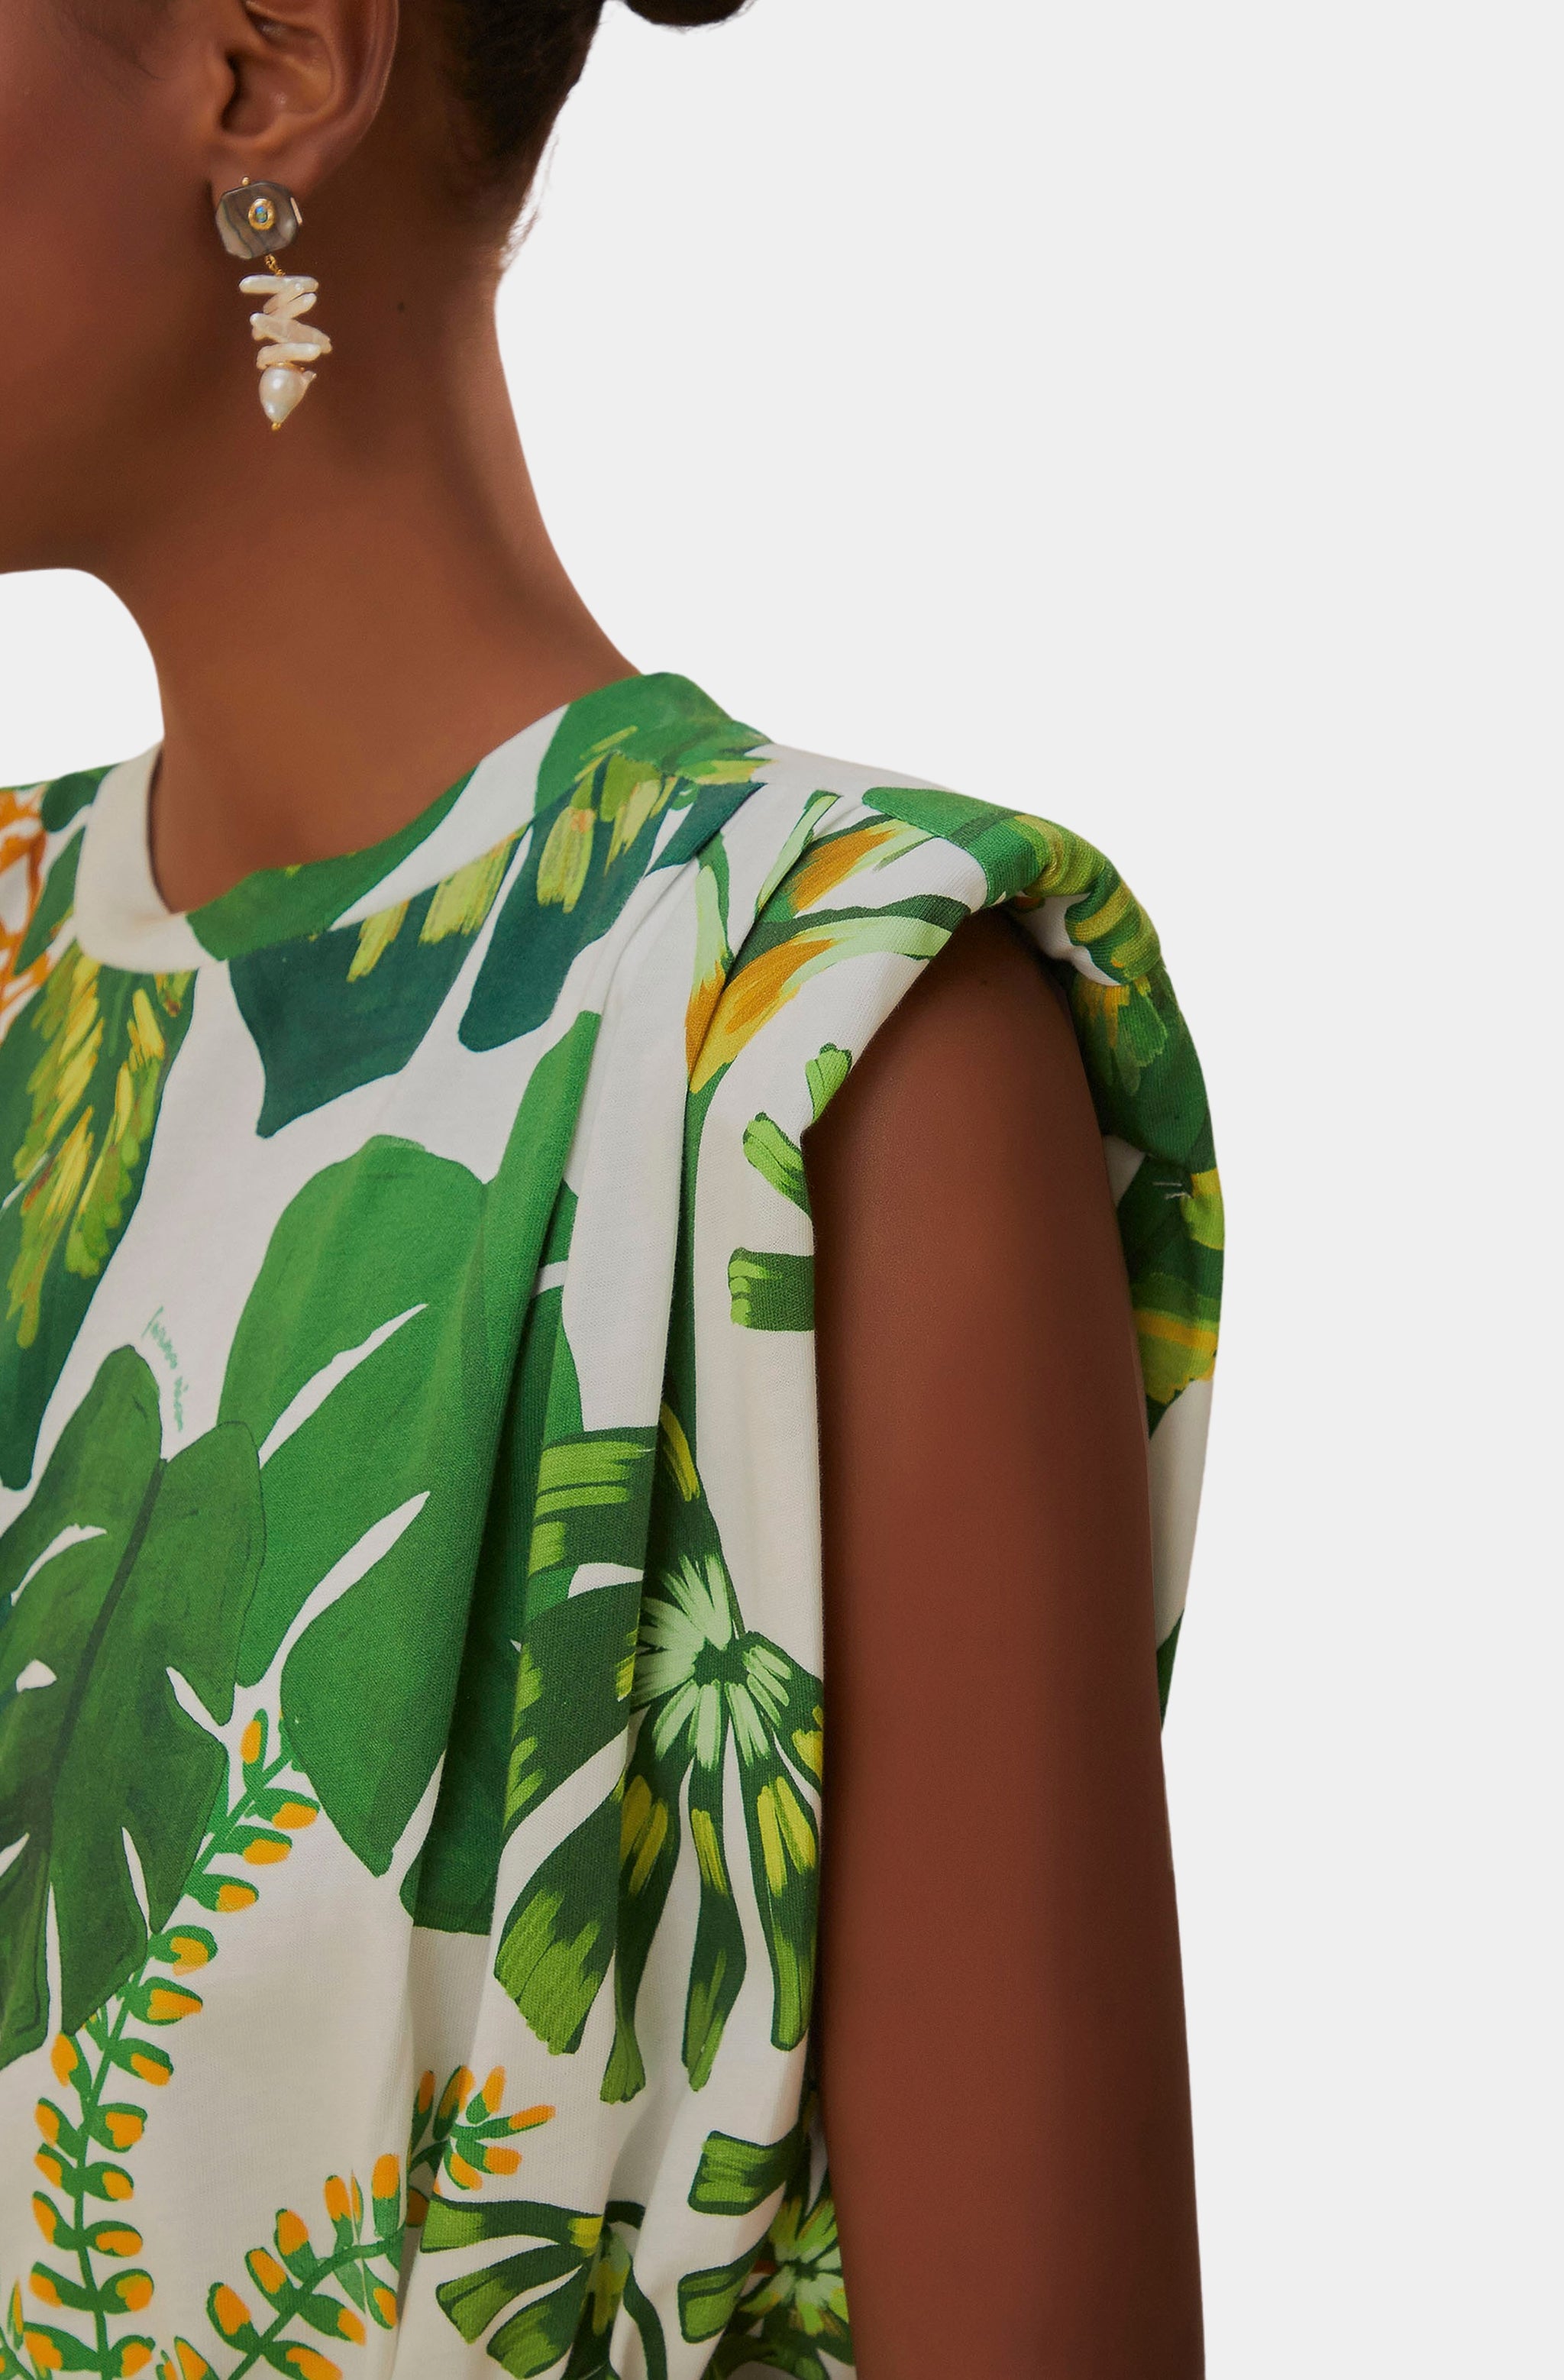 Tropical Forest Off-White T-Shirt Mini Dress